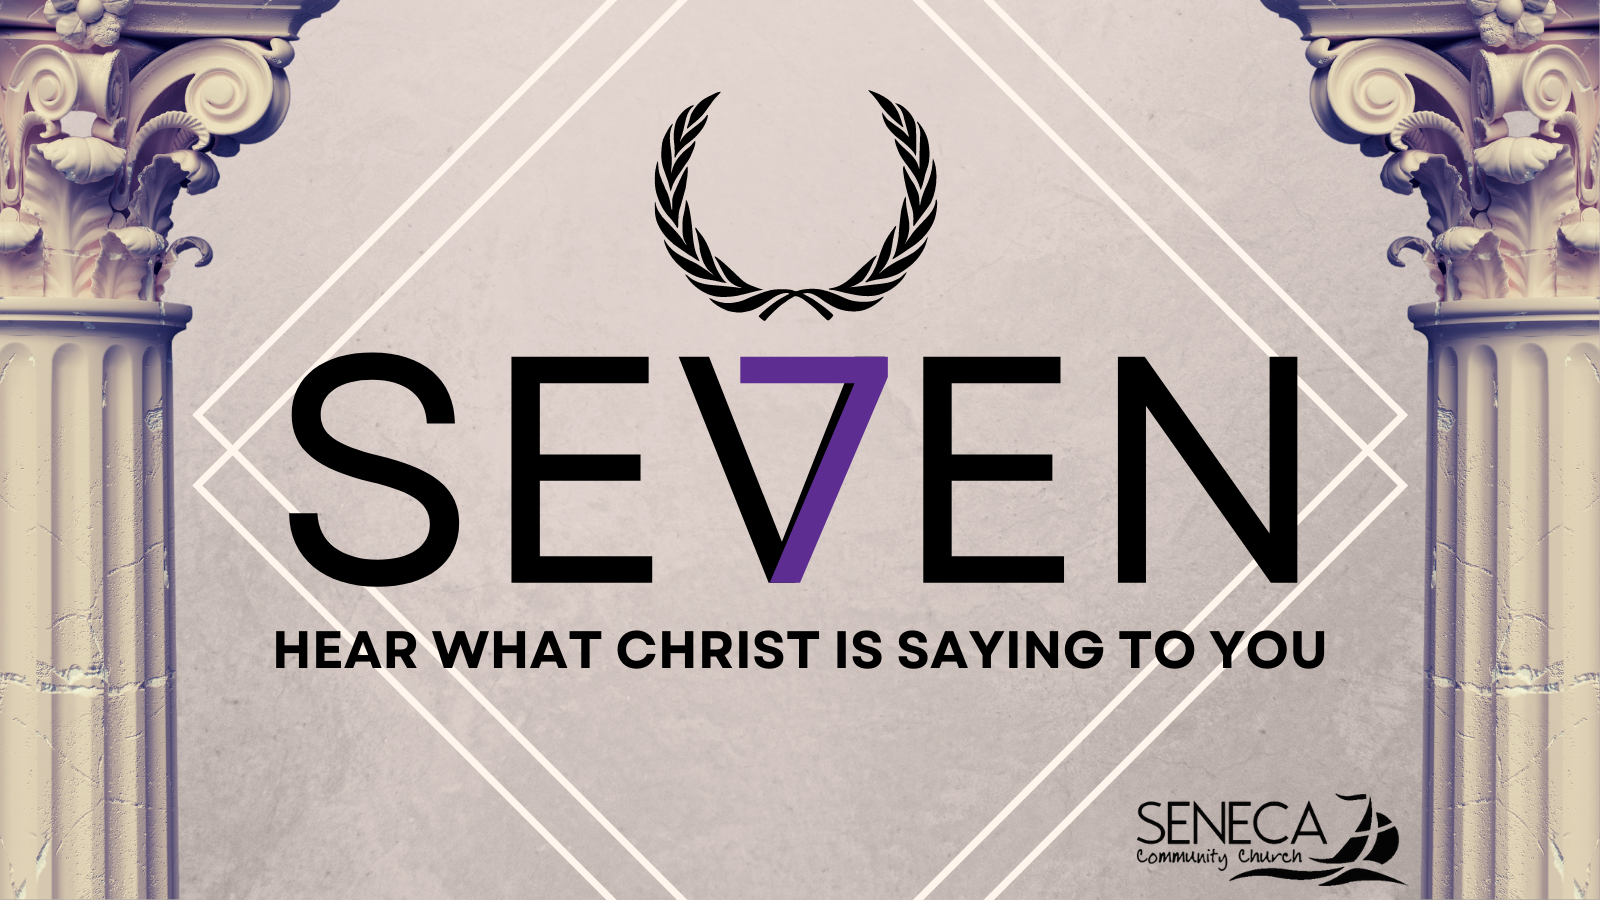 Seven: Hear What Christ is Saying to You